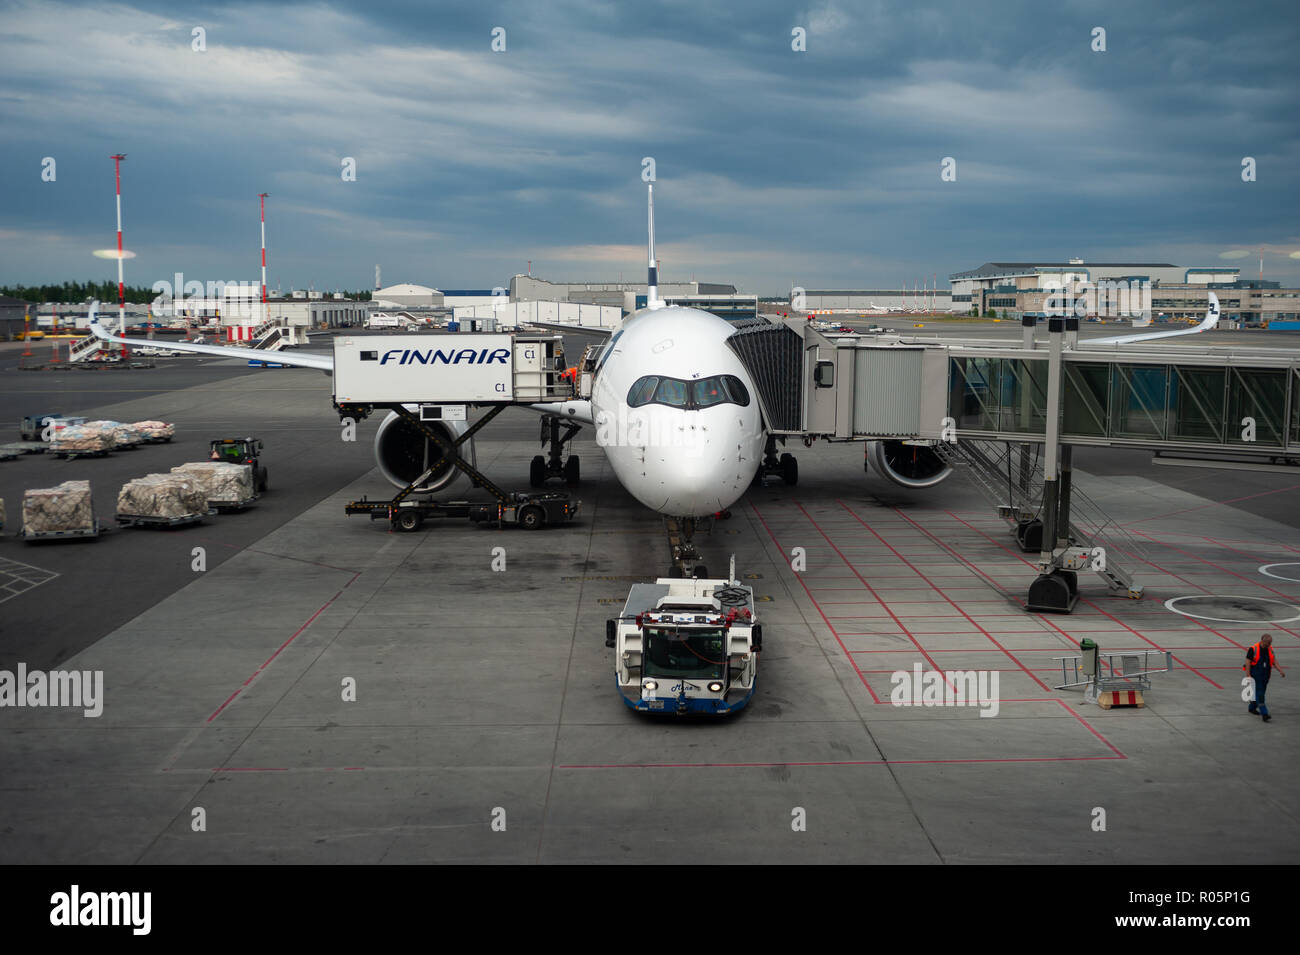 04.06.2018 - Helsinki, Finland, Europe - A Finnair Airbus A350 passenger plane is parked at a gate at Helsinki's airport Vantaa. Stock Photo